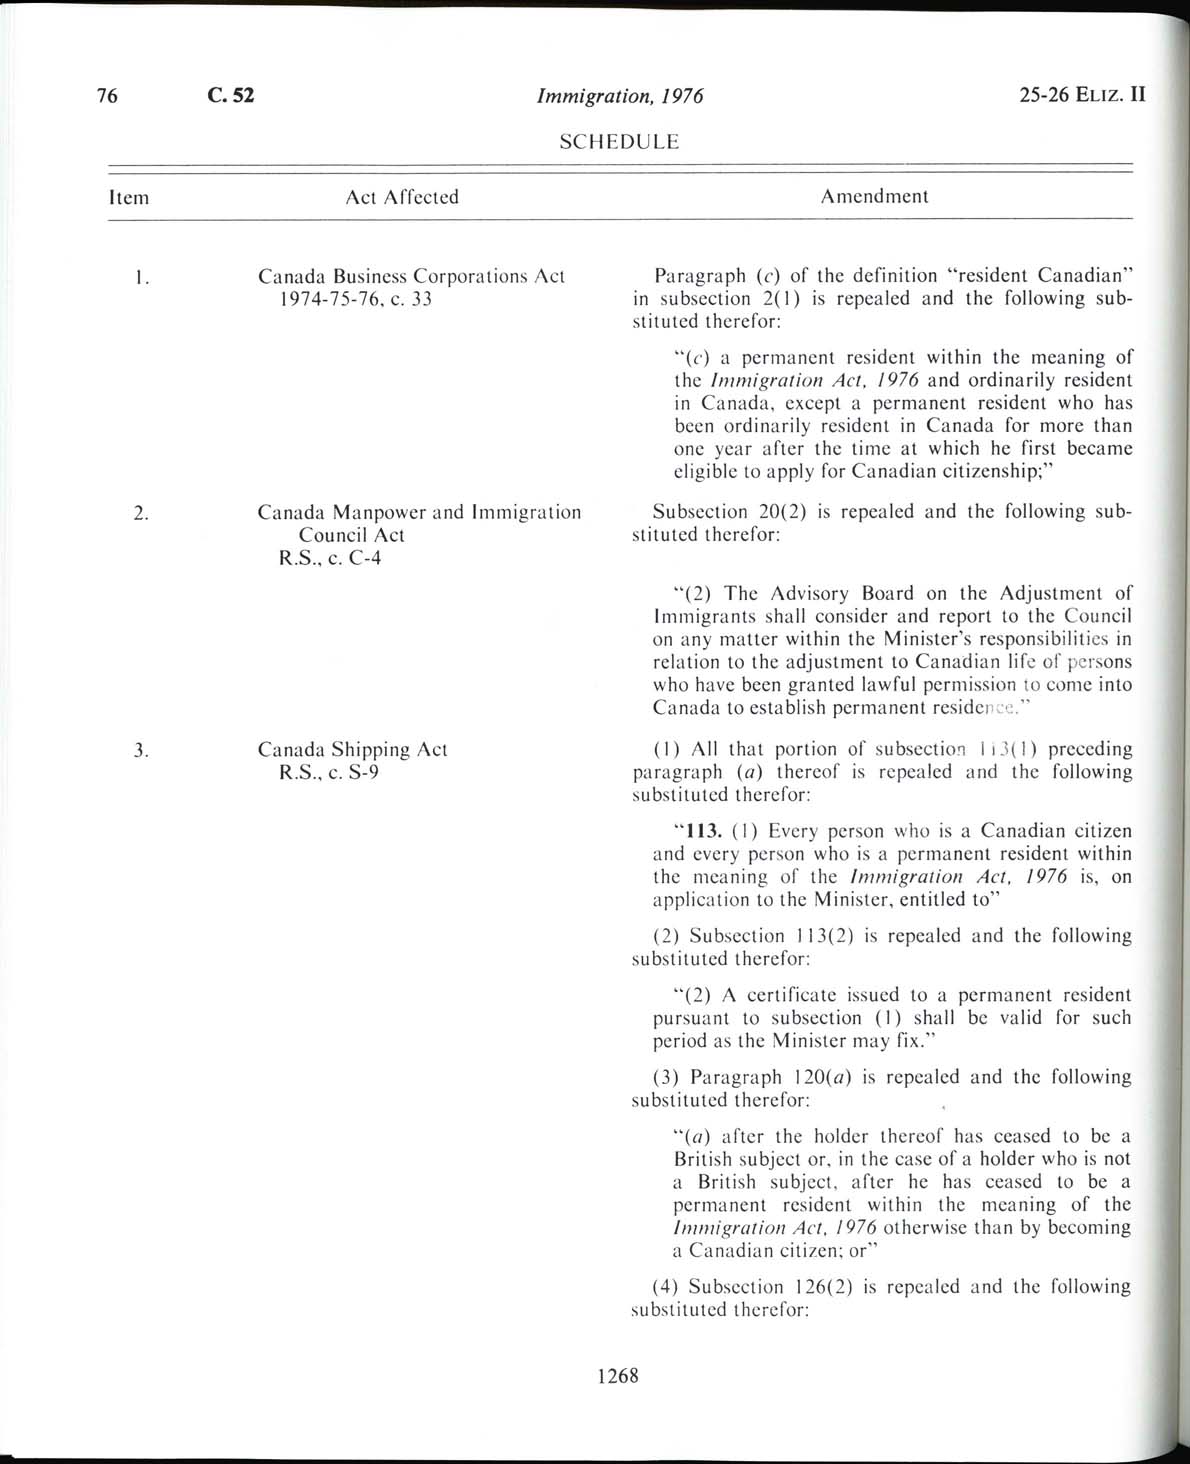 Page 1268 Immigration Act, 1976